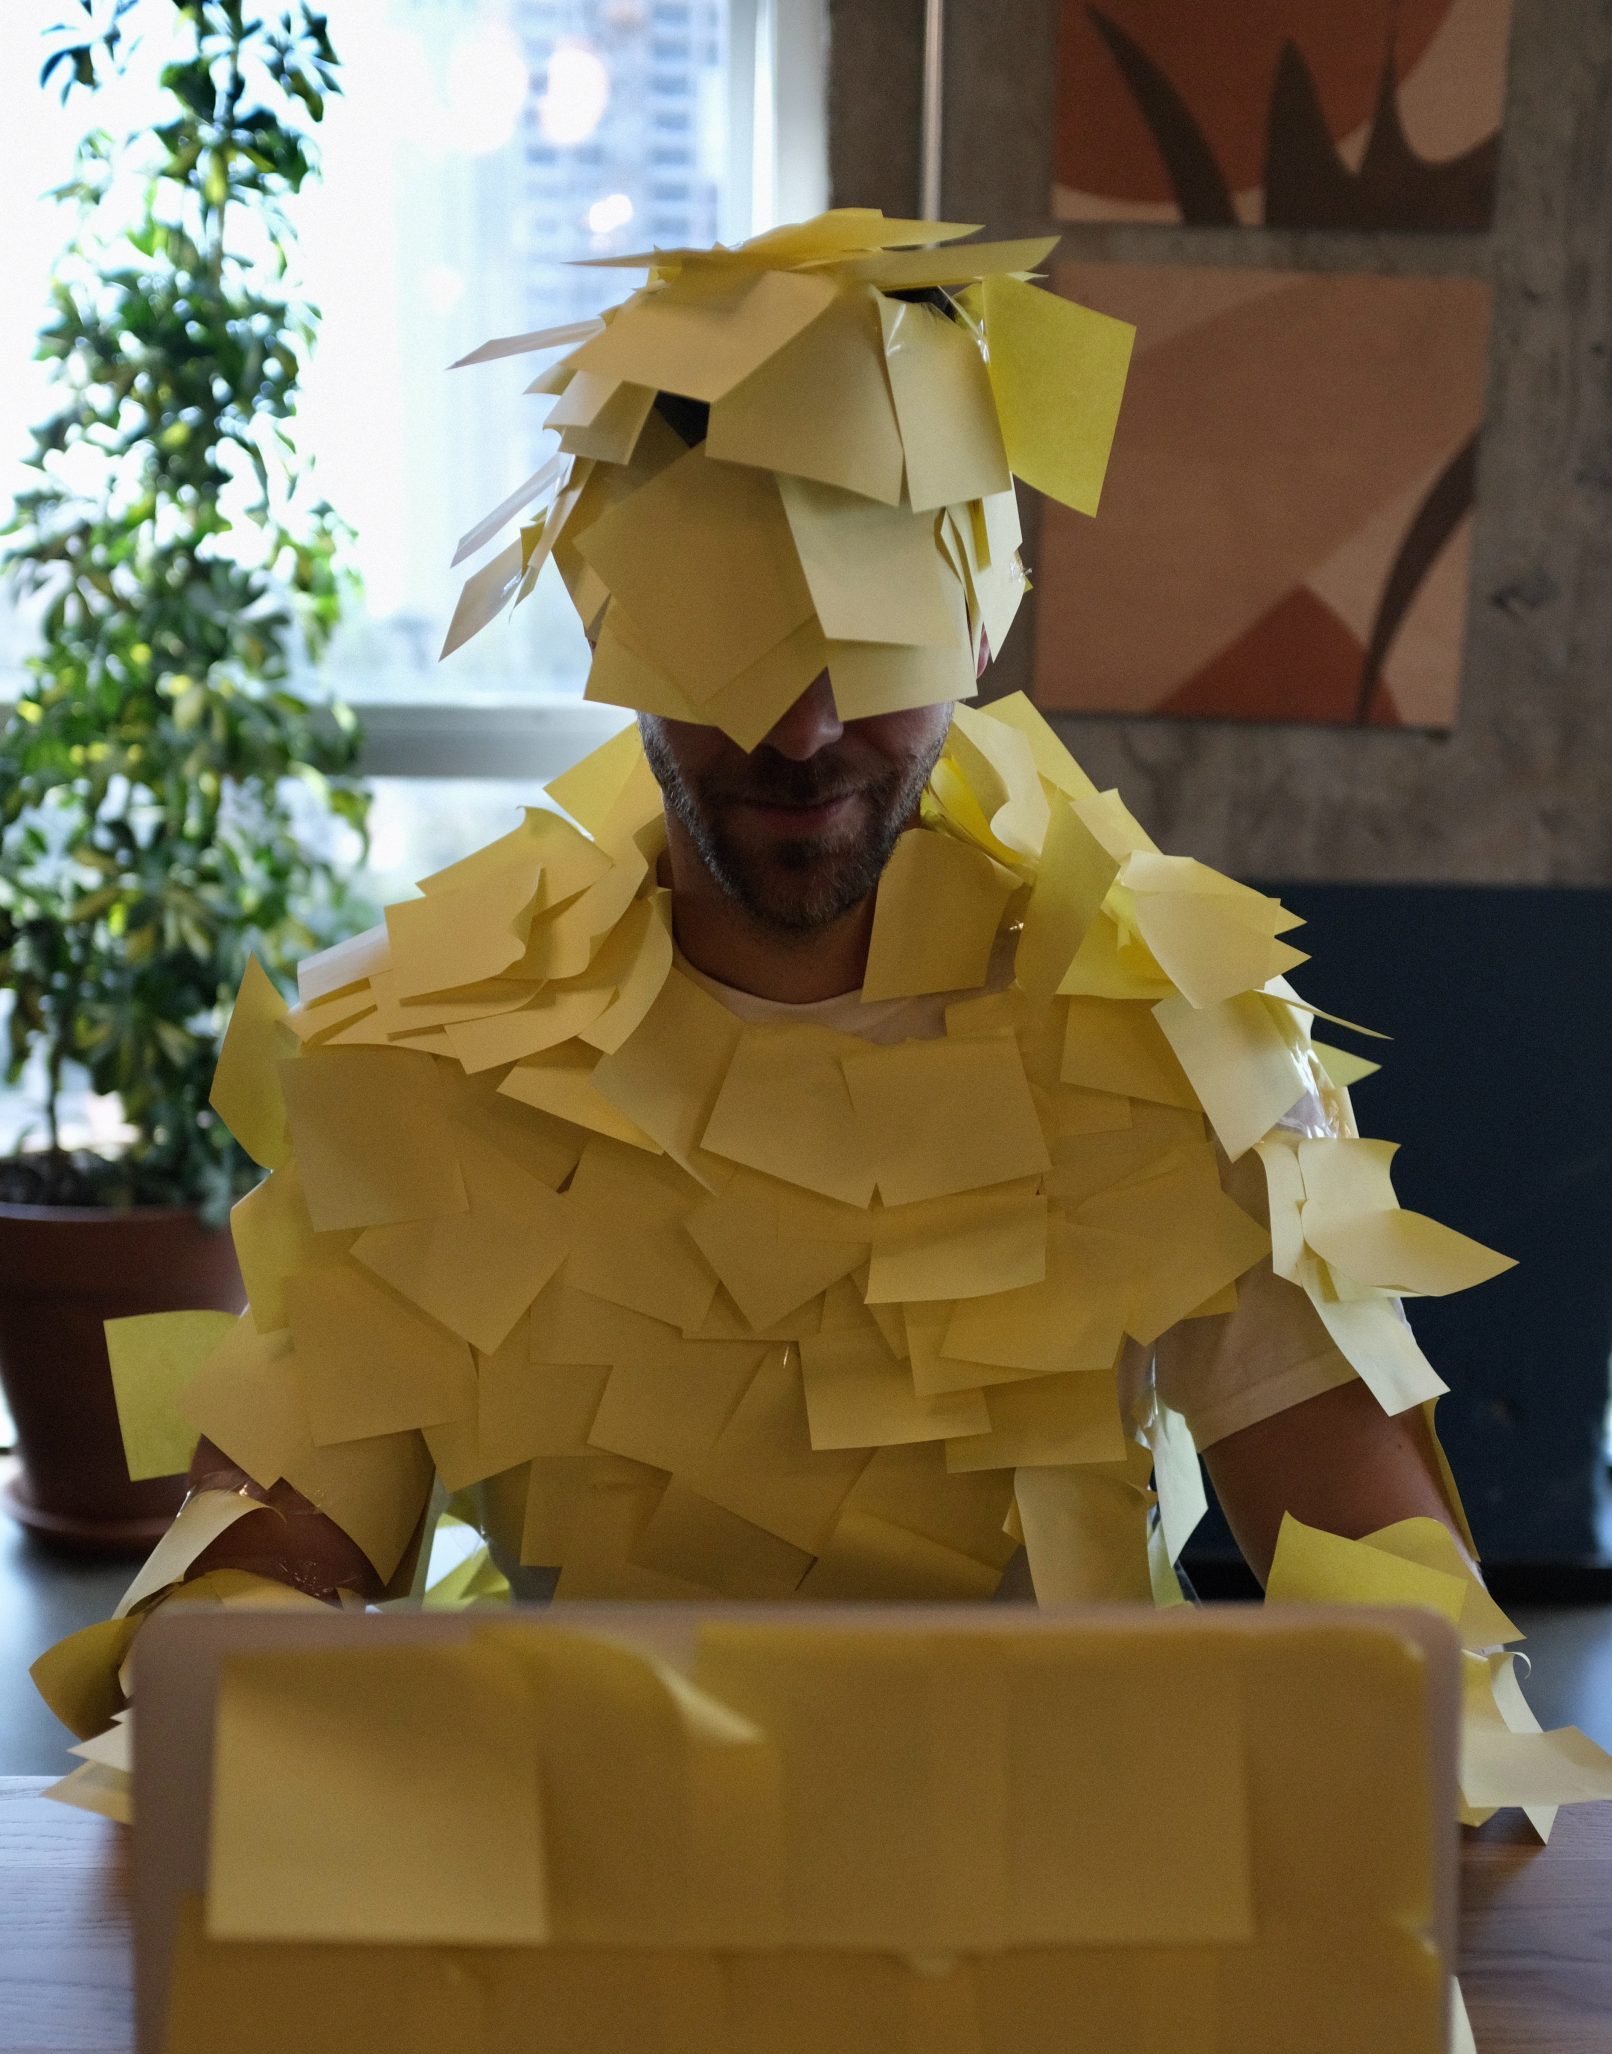 A person covered in sticky notes